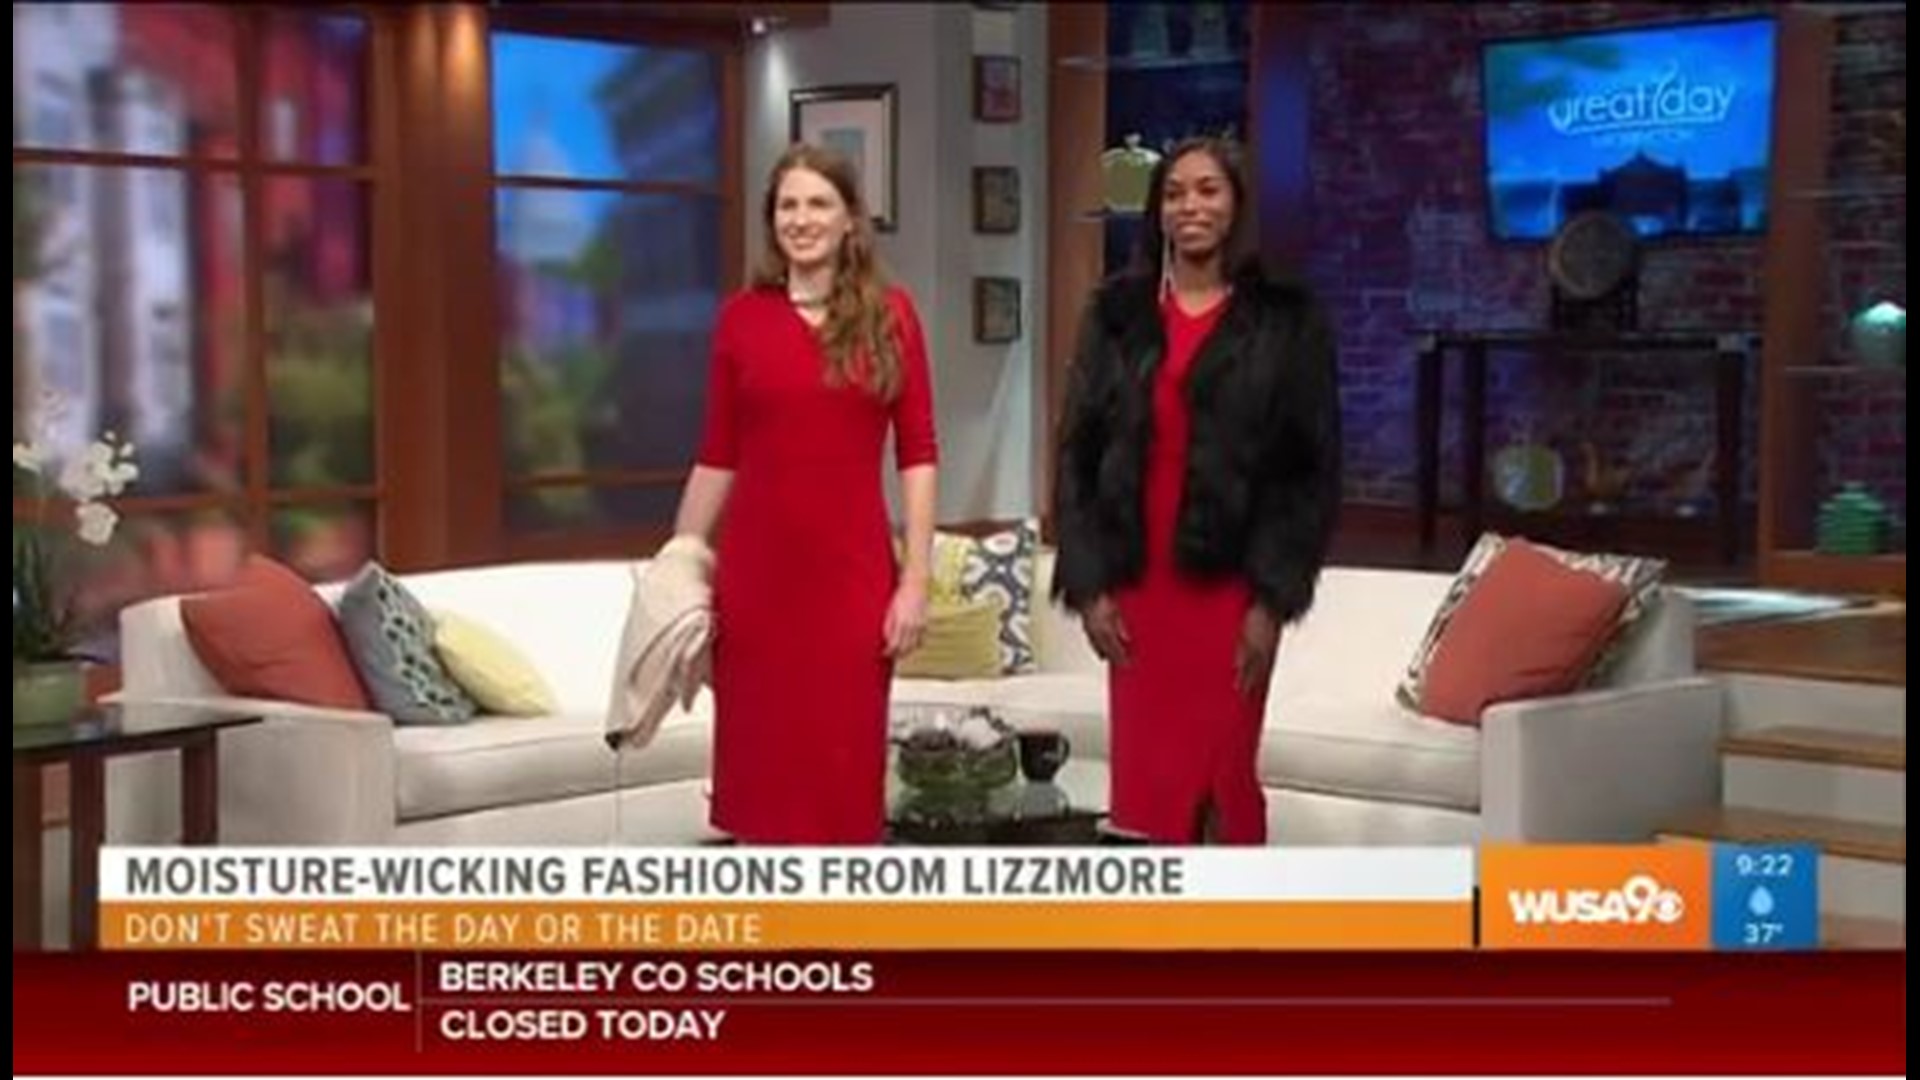 Never let them see you sweat - at work or on that date! Owner of Lizzmore Womenswear, Erica Harding shares how she came up with moisture-wicking fabric that prevents those fashion faux pas.